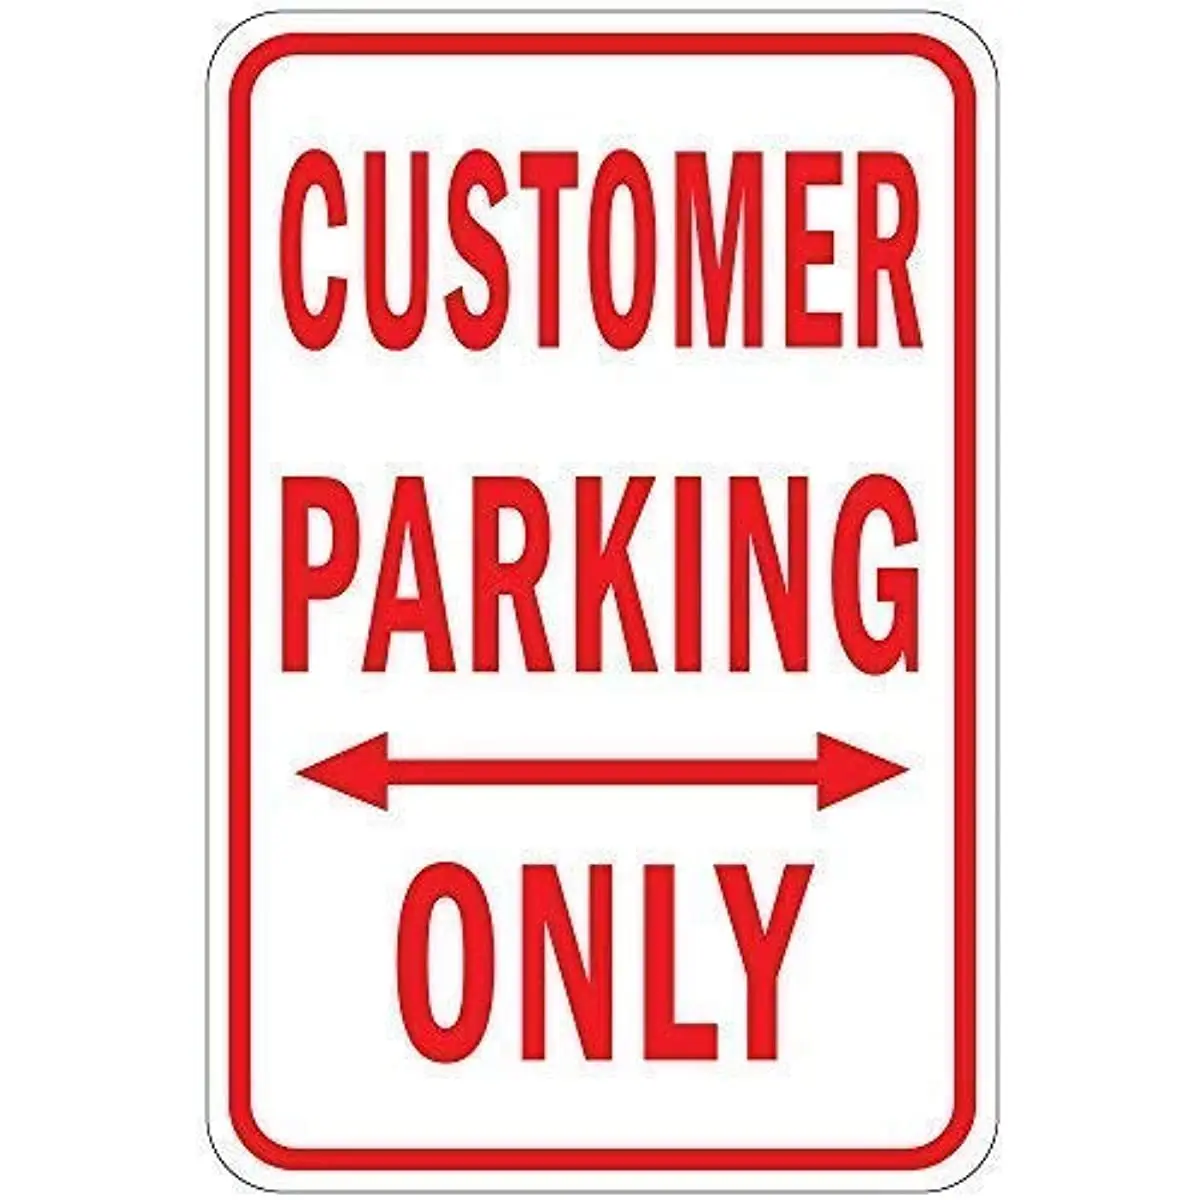 

New Funny Novelty Metal Sign Aluminum Sign Customer Parking Only W Double Arrow Sign for Outdoor & Indoor 16" x 12"